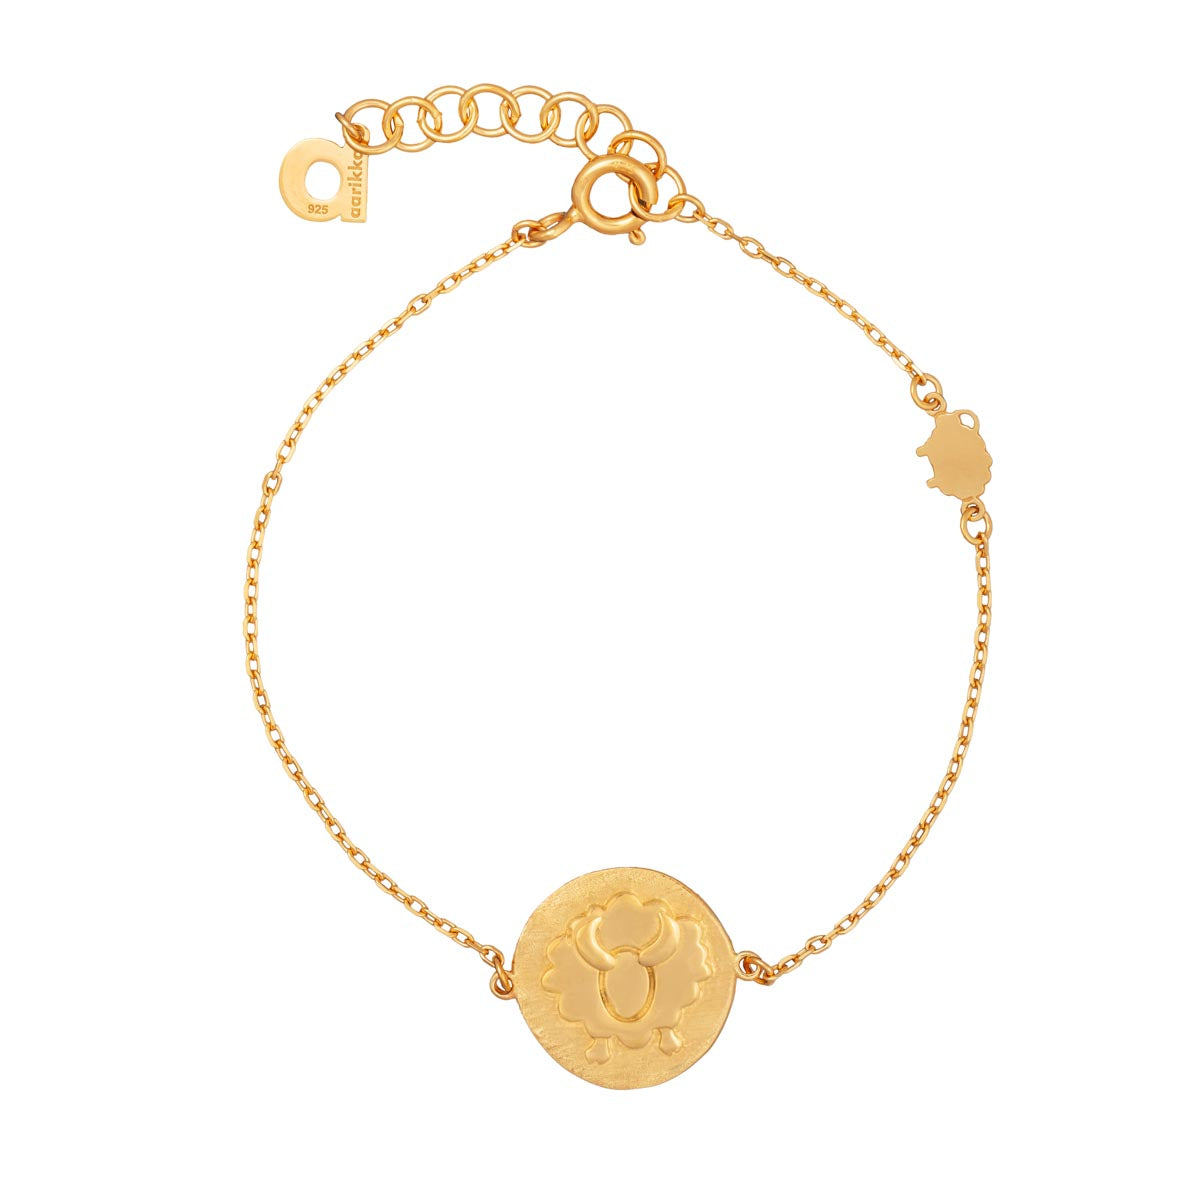 Taurus bracelet, gold-plated silver